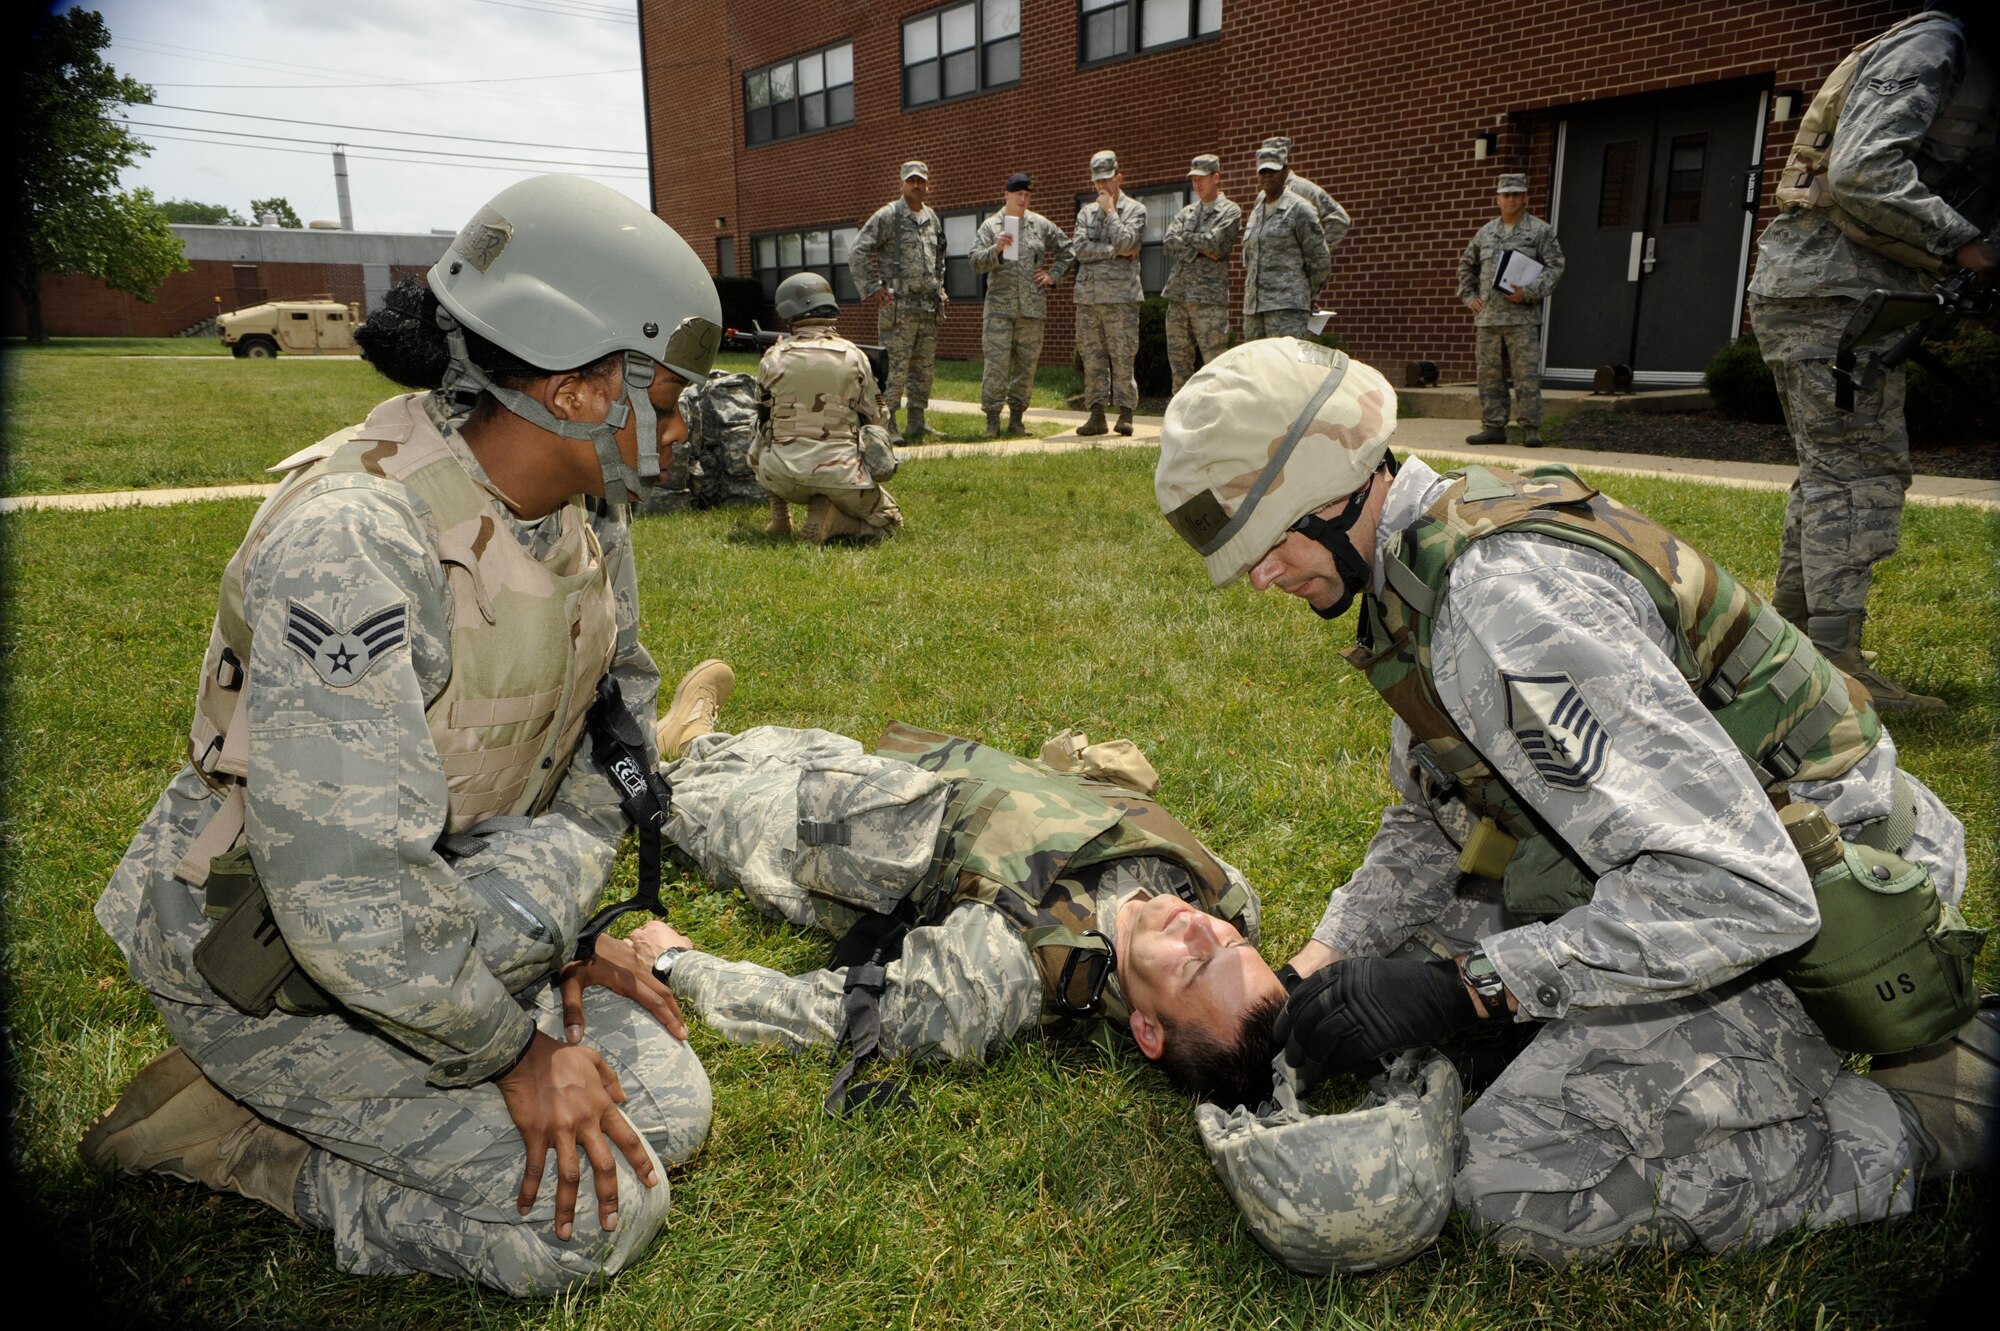 Students from the U.S. Air Force Expeditionary Center at Joint Base
McGuire-Dix-Lakehurst, N.J., perform combat first aid on a simulated
casualty while Chief Master Sgt. Robert Tappana, Air Education and Training
Command command chief master sergeant looks on with other members of EC
leadership June 16.  Chief Tappana visited the Expeditionary Center to get a
first-hand look at how the organization conducts pre-deployment training for
Airmen preparing to deploy to support ongoing expeditionary operations.
(U.S. Air Force photo by Carlos Cintron/Released)
